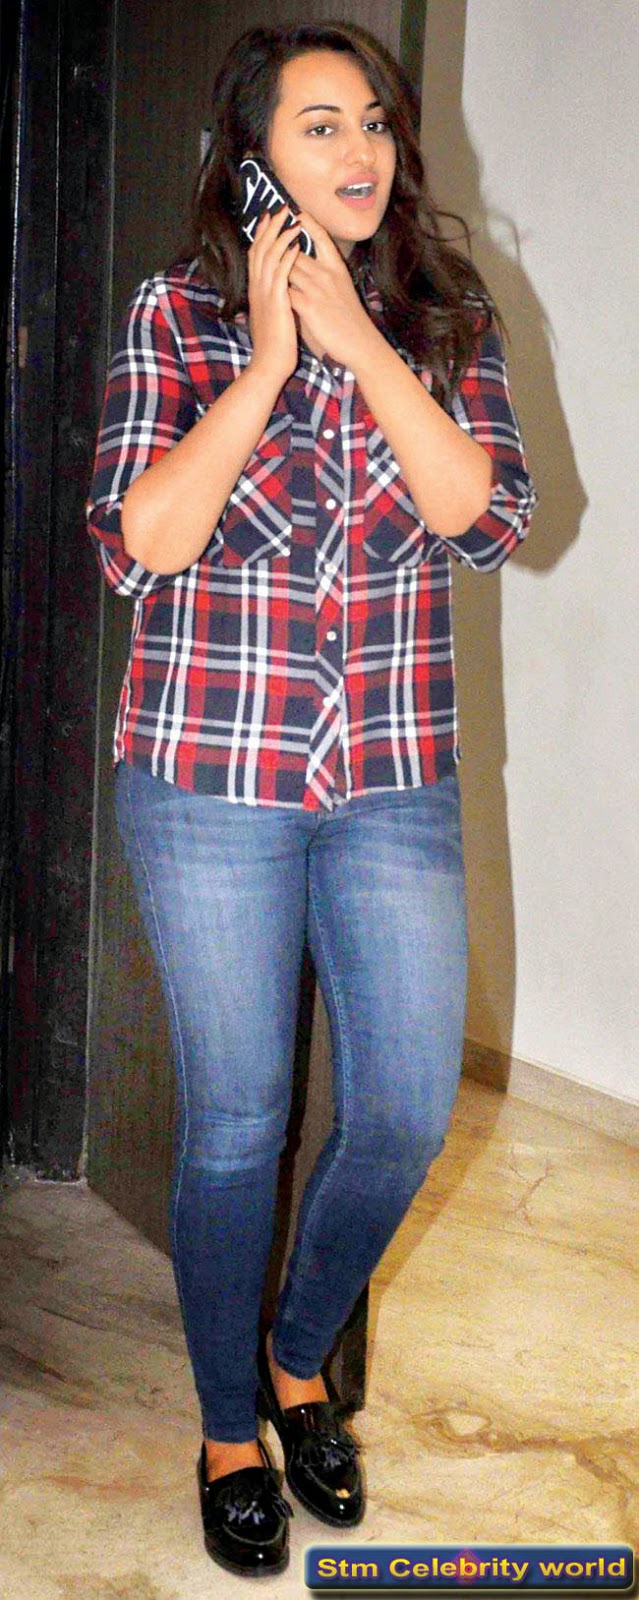 Bollywood Actress Sonakshi Sinha Hot Tight Jeans And New Spicy Gallery